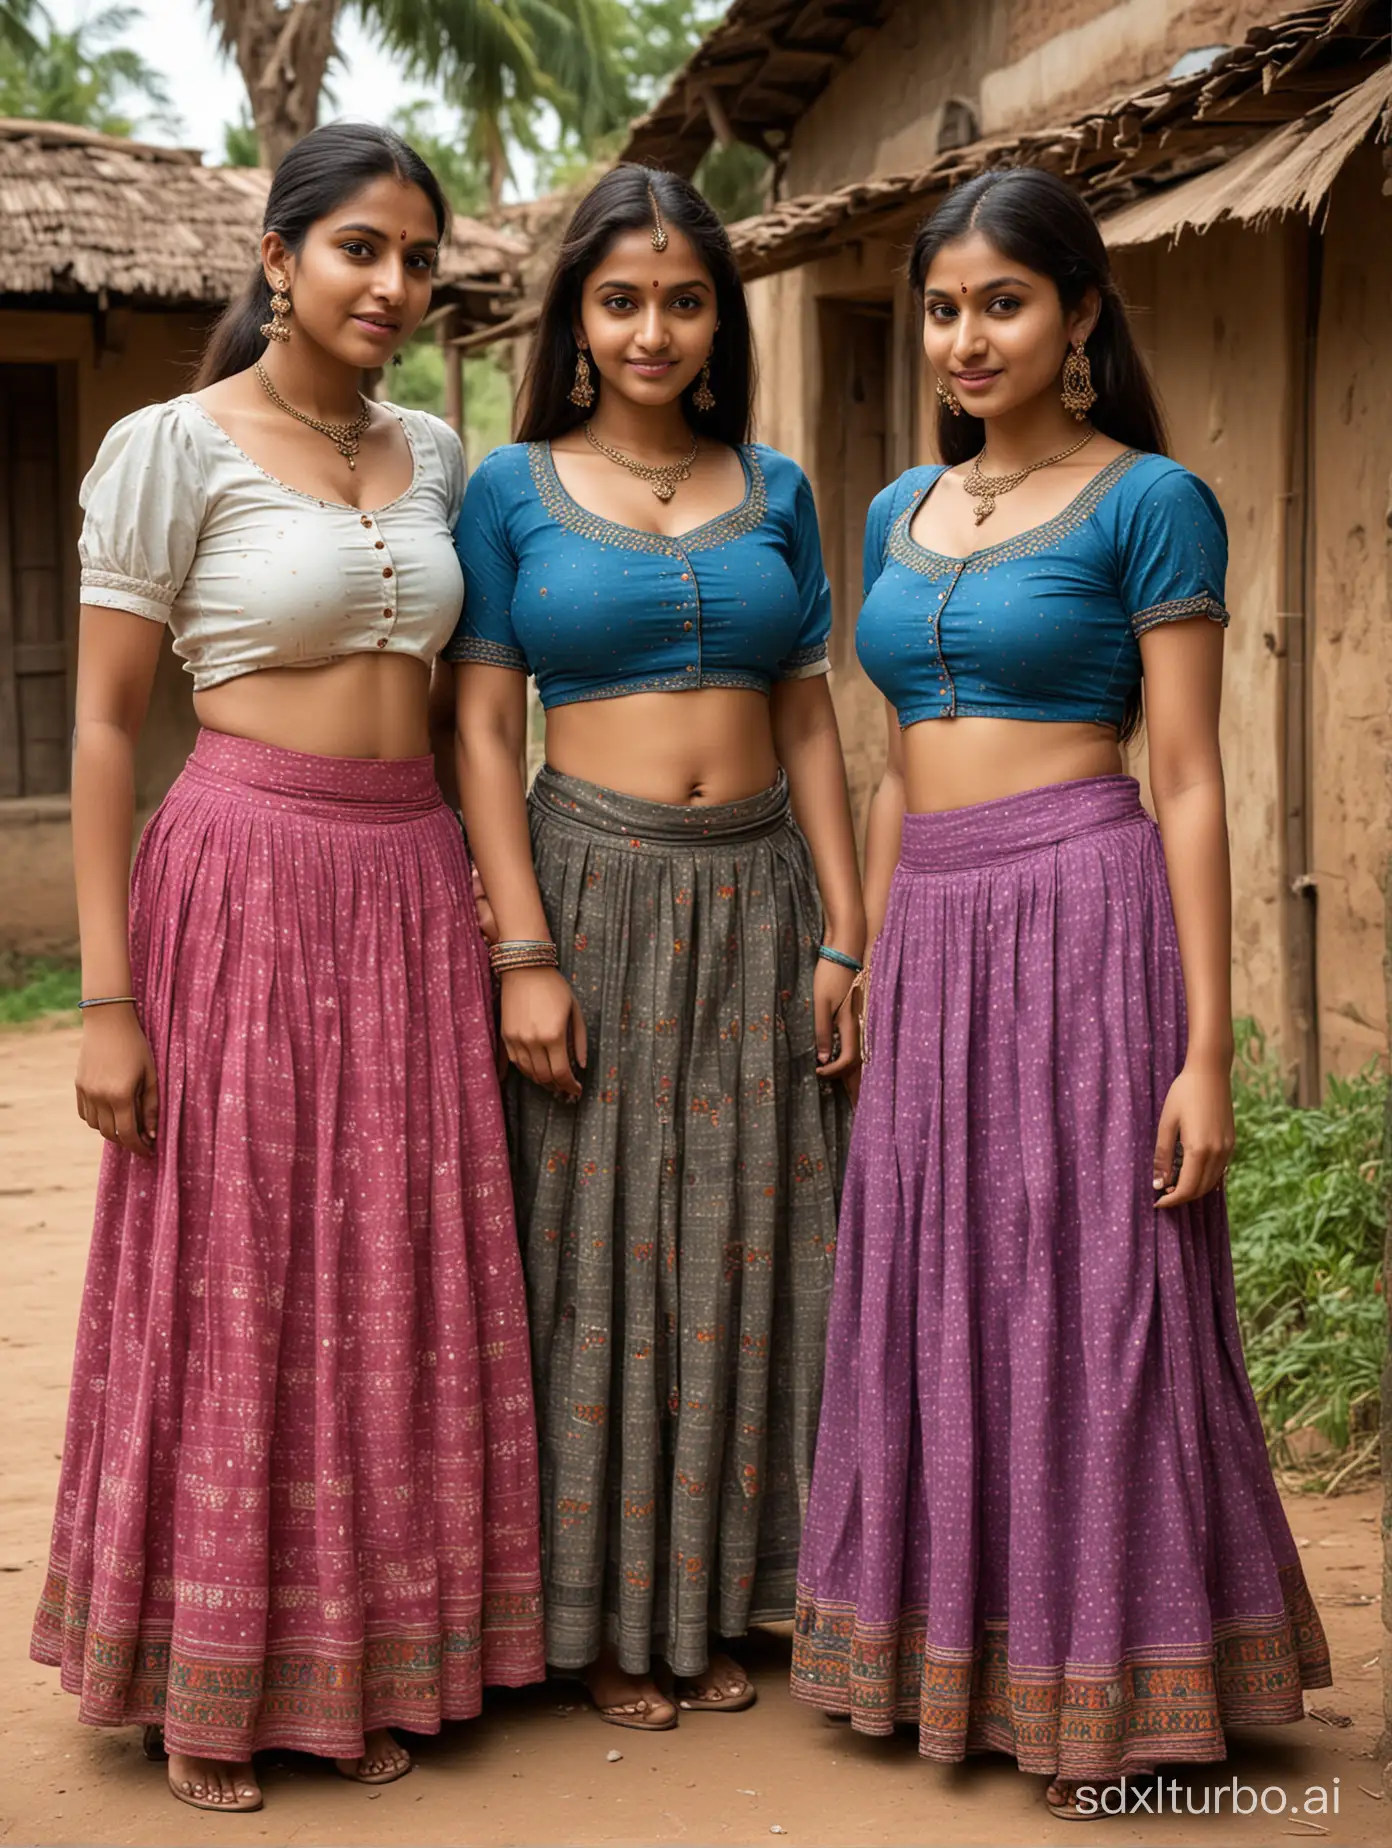 Indian 3 busty girls realistic photograph of three young rustic village beauties dressed in an unhooked blouse and Indian skirt.